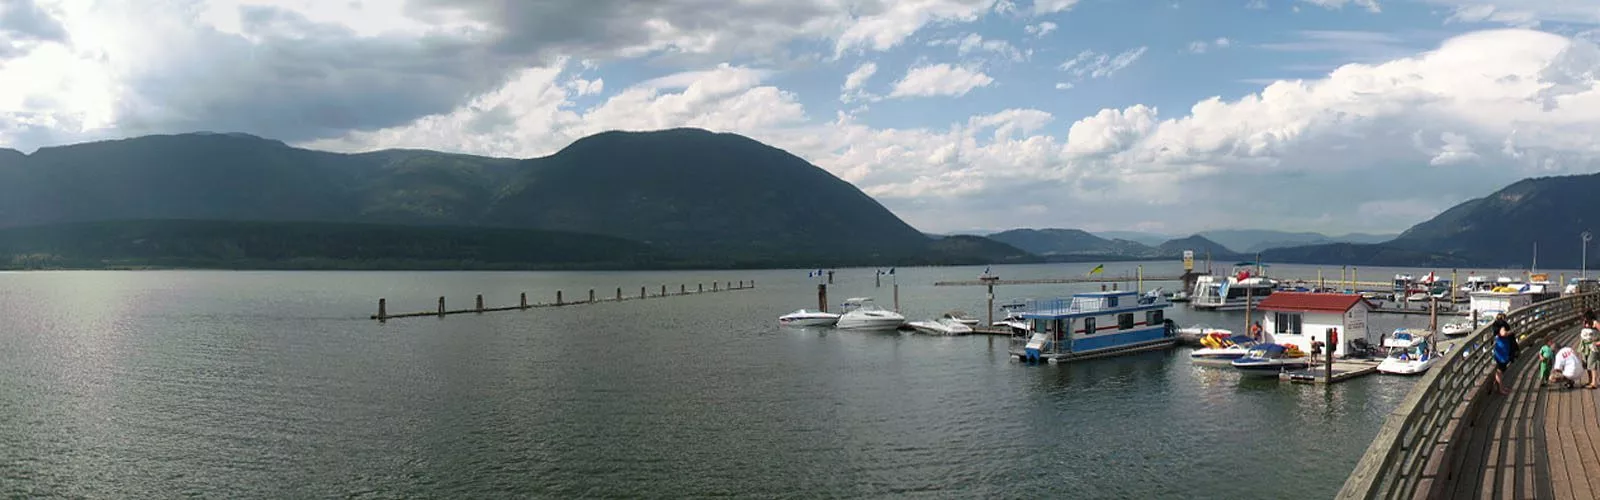 Salmon Arm View of town Wharf and lake -sliver (Mark Ruthenberg)